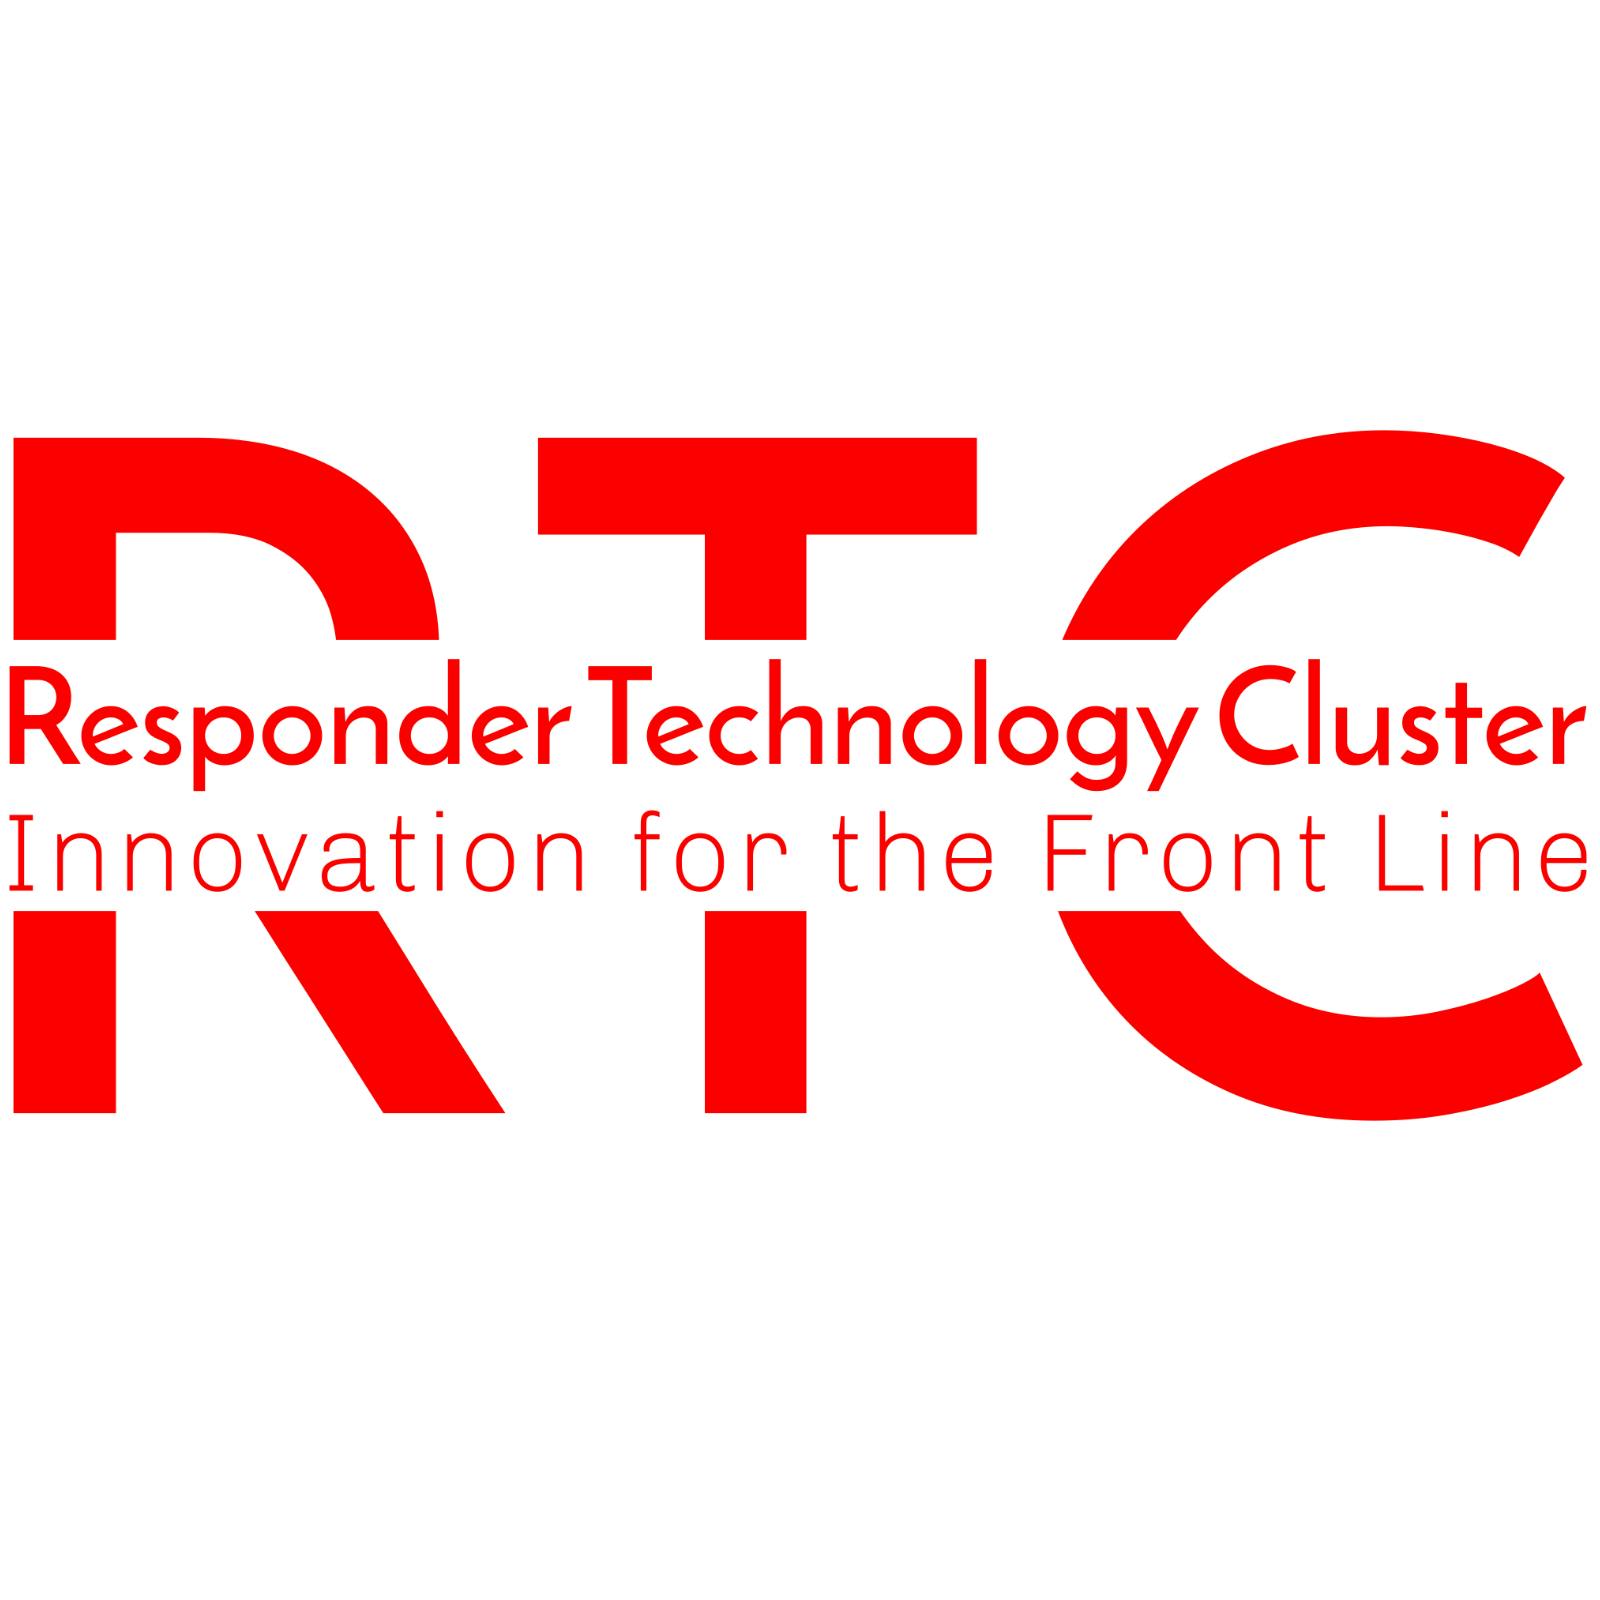 The logo of the RTC cluster, the Responder Technology Cluster